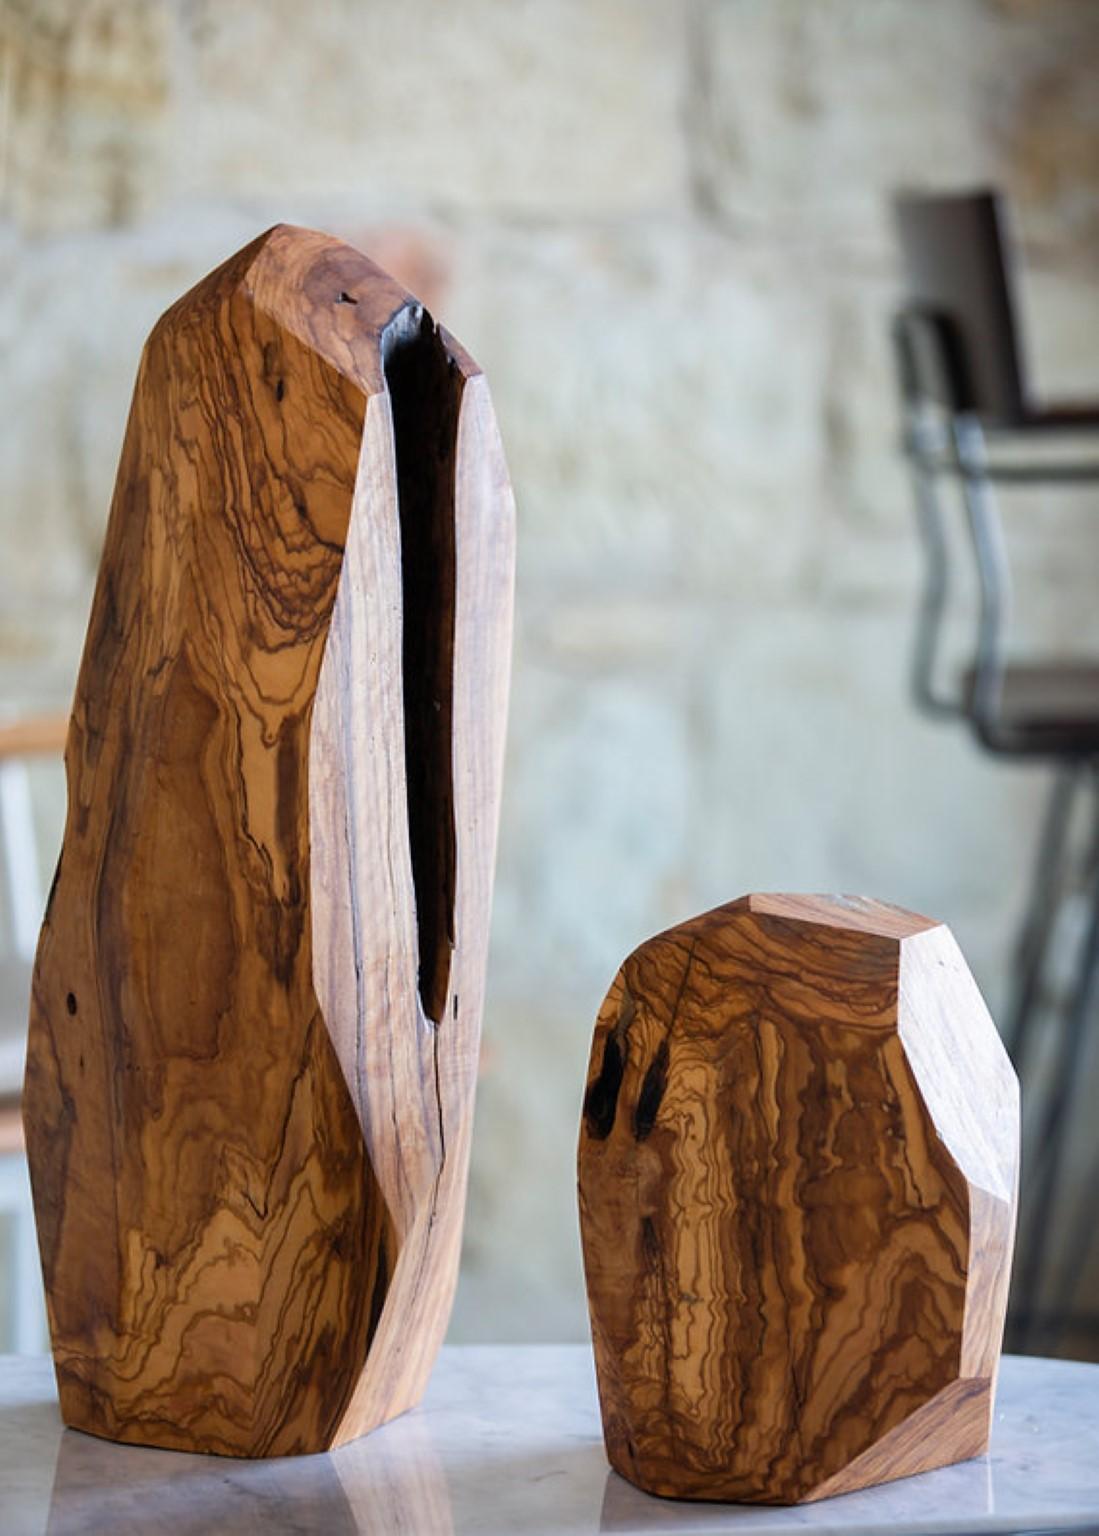 Set of 2 sculptures in olive wood by Rectangle Studio
Dimensions: 
Large: 23 x 23 x 55 cm
Small: 20 x 20 x 28 cm
Materials: Solid olive wood

It is collected from the roots and branches of different olive trees in the Aegean geography, shaped